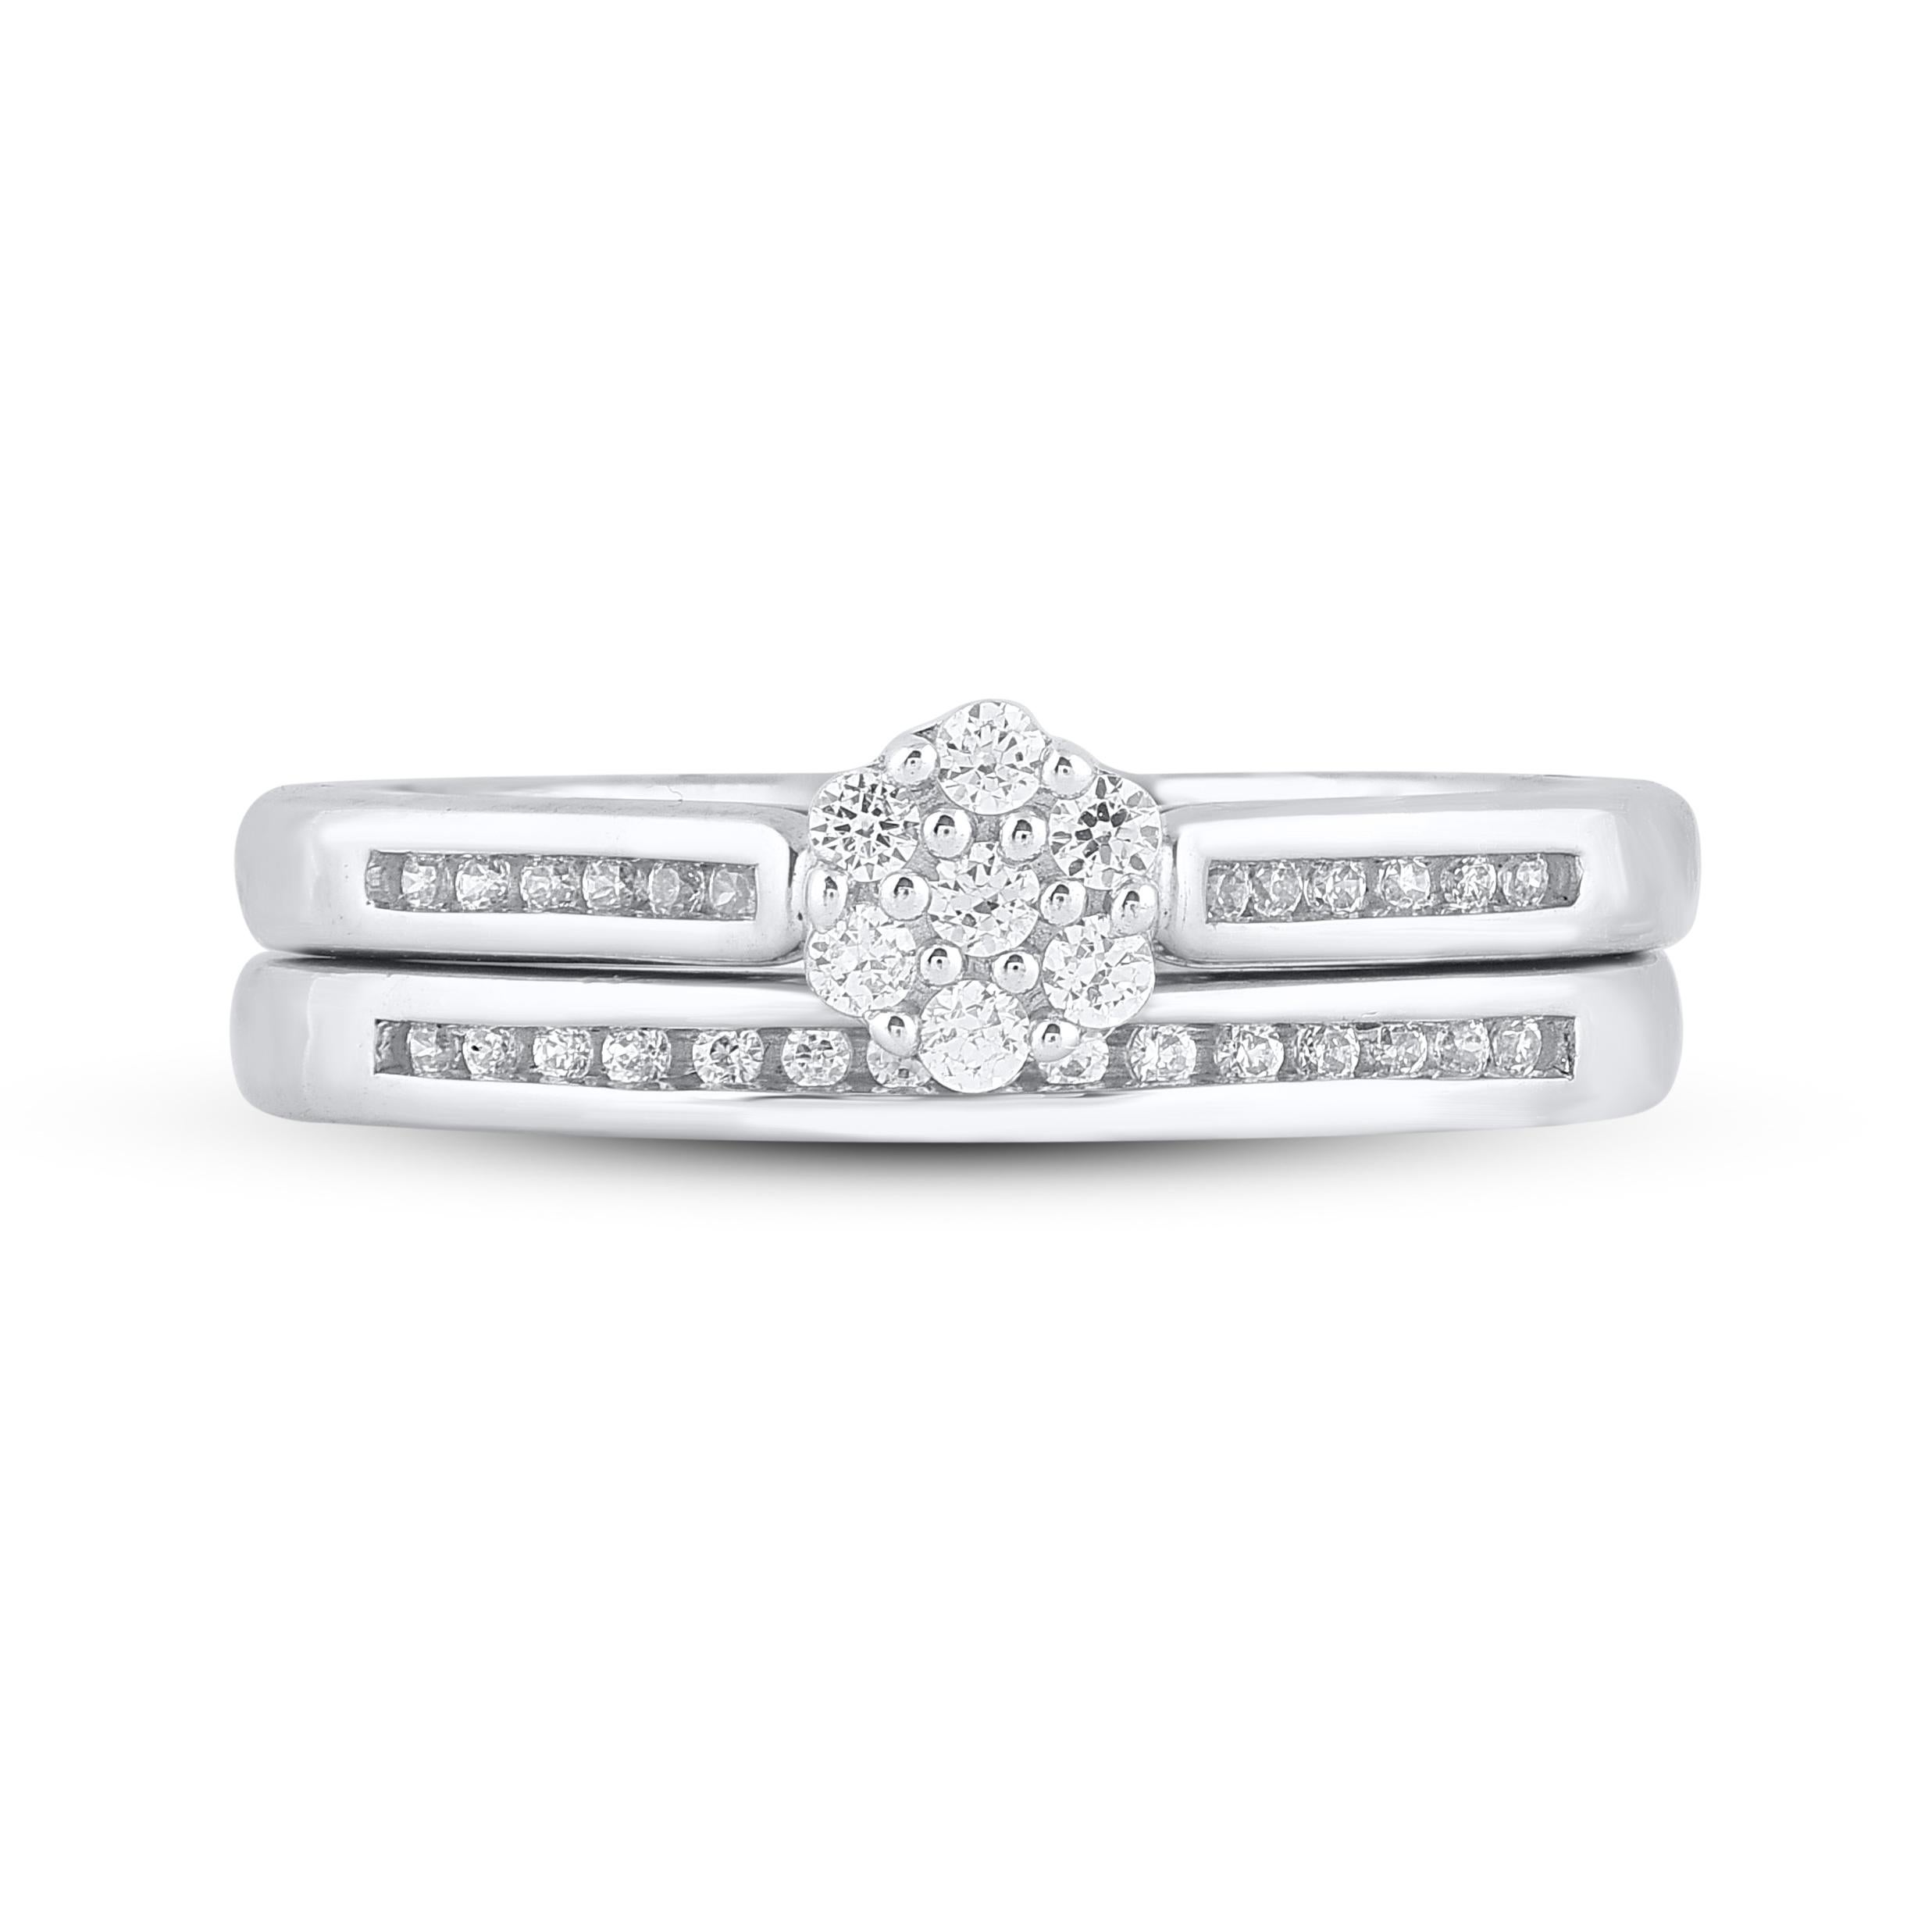 Let your love shine through this beautiful diamond bridal set. Crafted in 14 Karat white gold. This wedding ring features a sparkling 34 brilliant cut and single cut round diamond beautifully set in prong & nic setting. The total diamond weight is